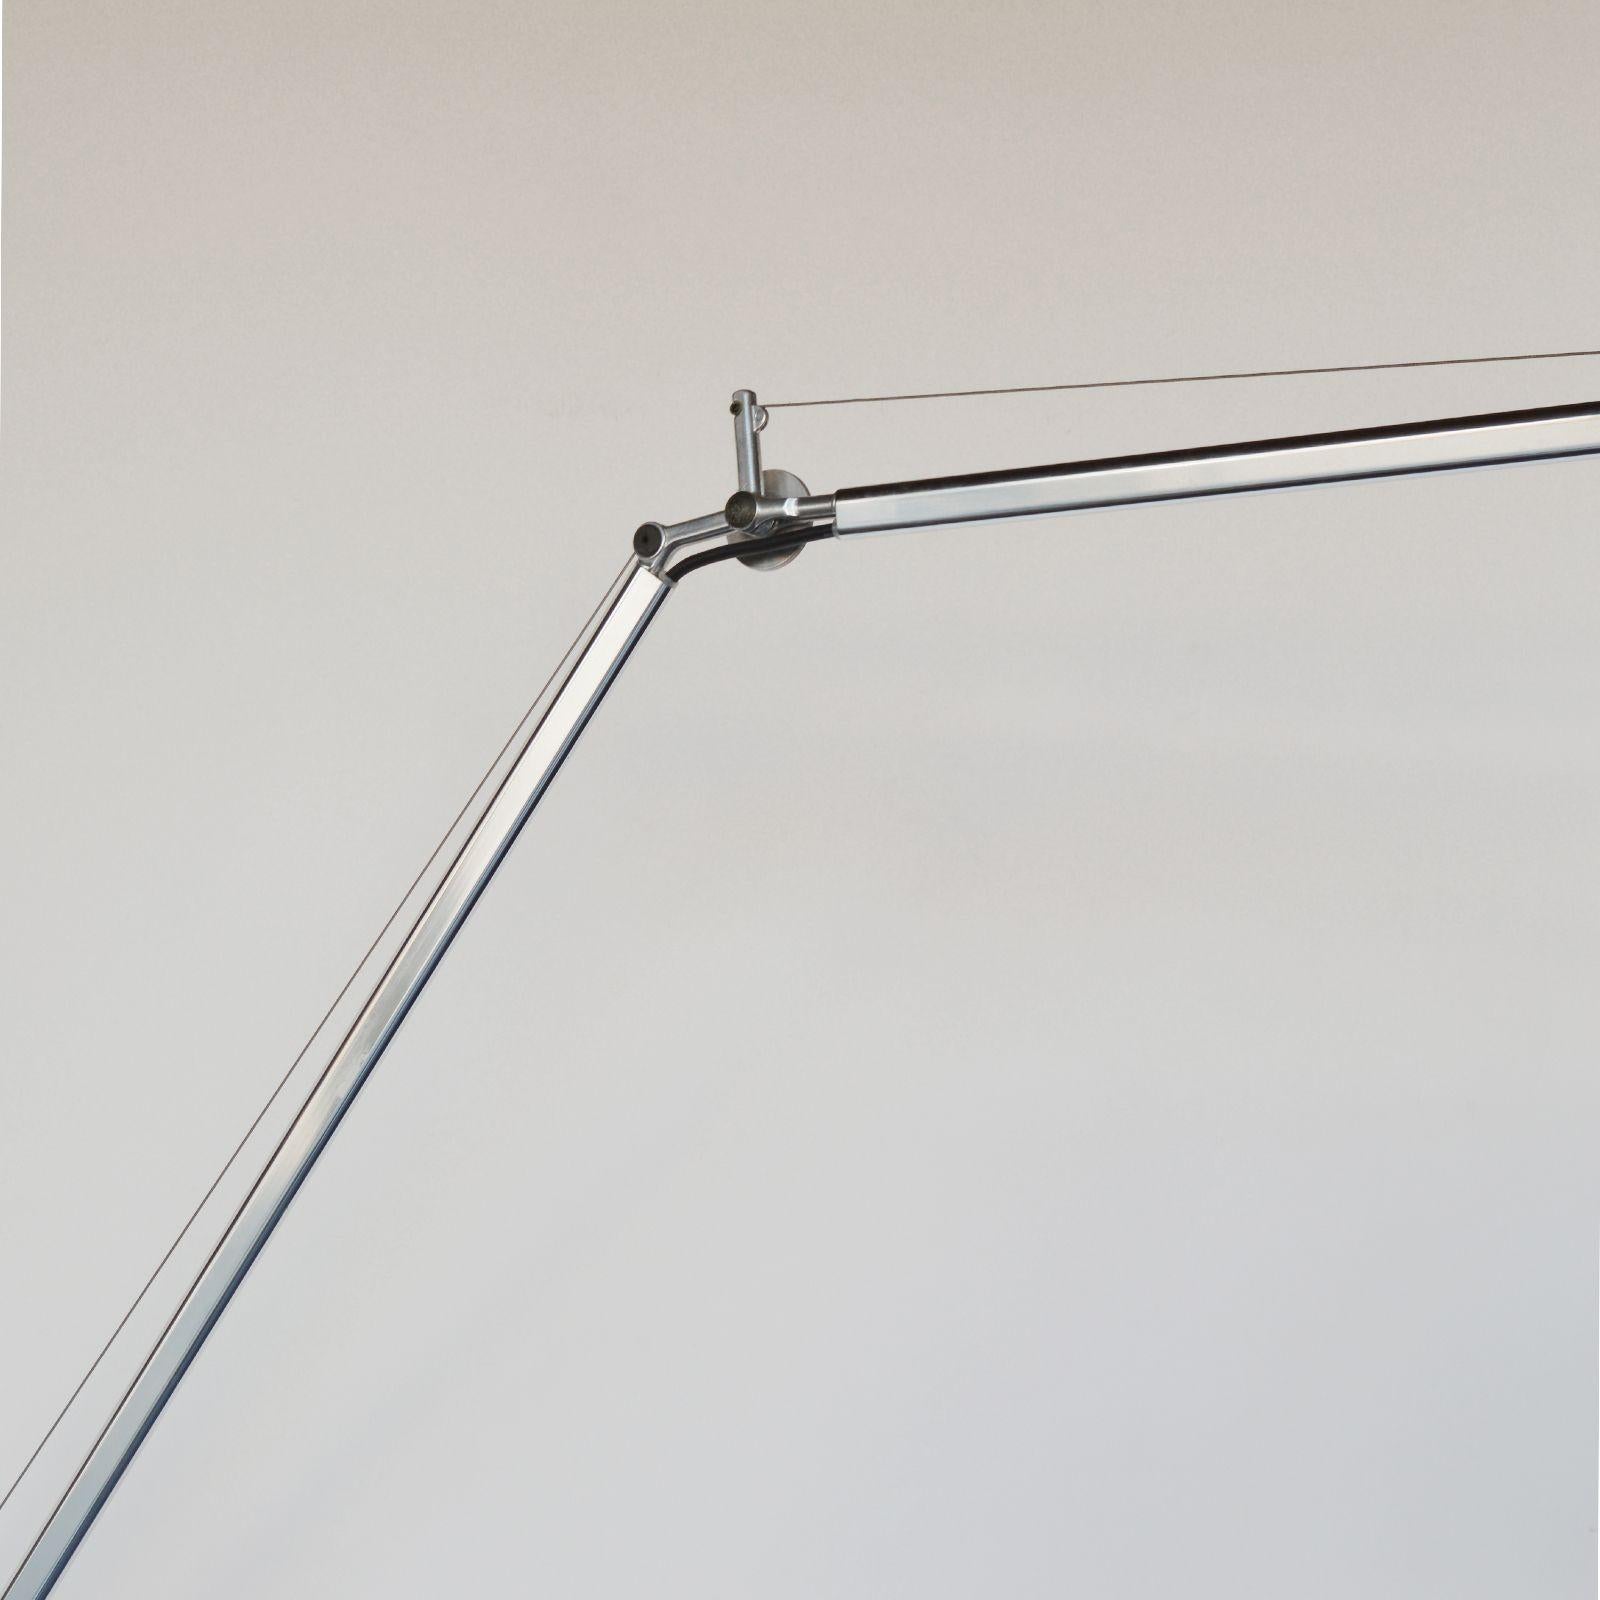 Artemide Tolomeo Floor Lamp by M. De Lucchi & G. Gassina In Excellent Condition For Sale In Los Angeles, CA